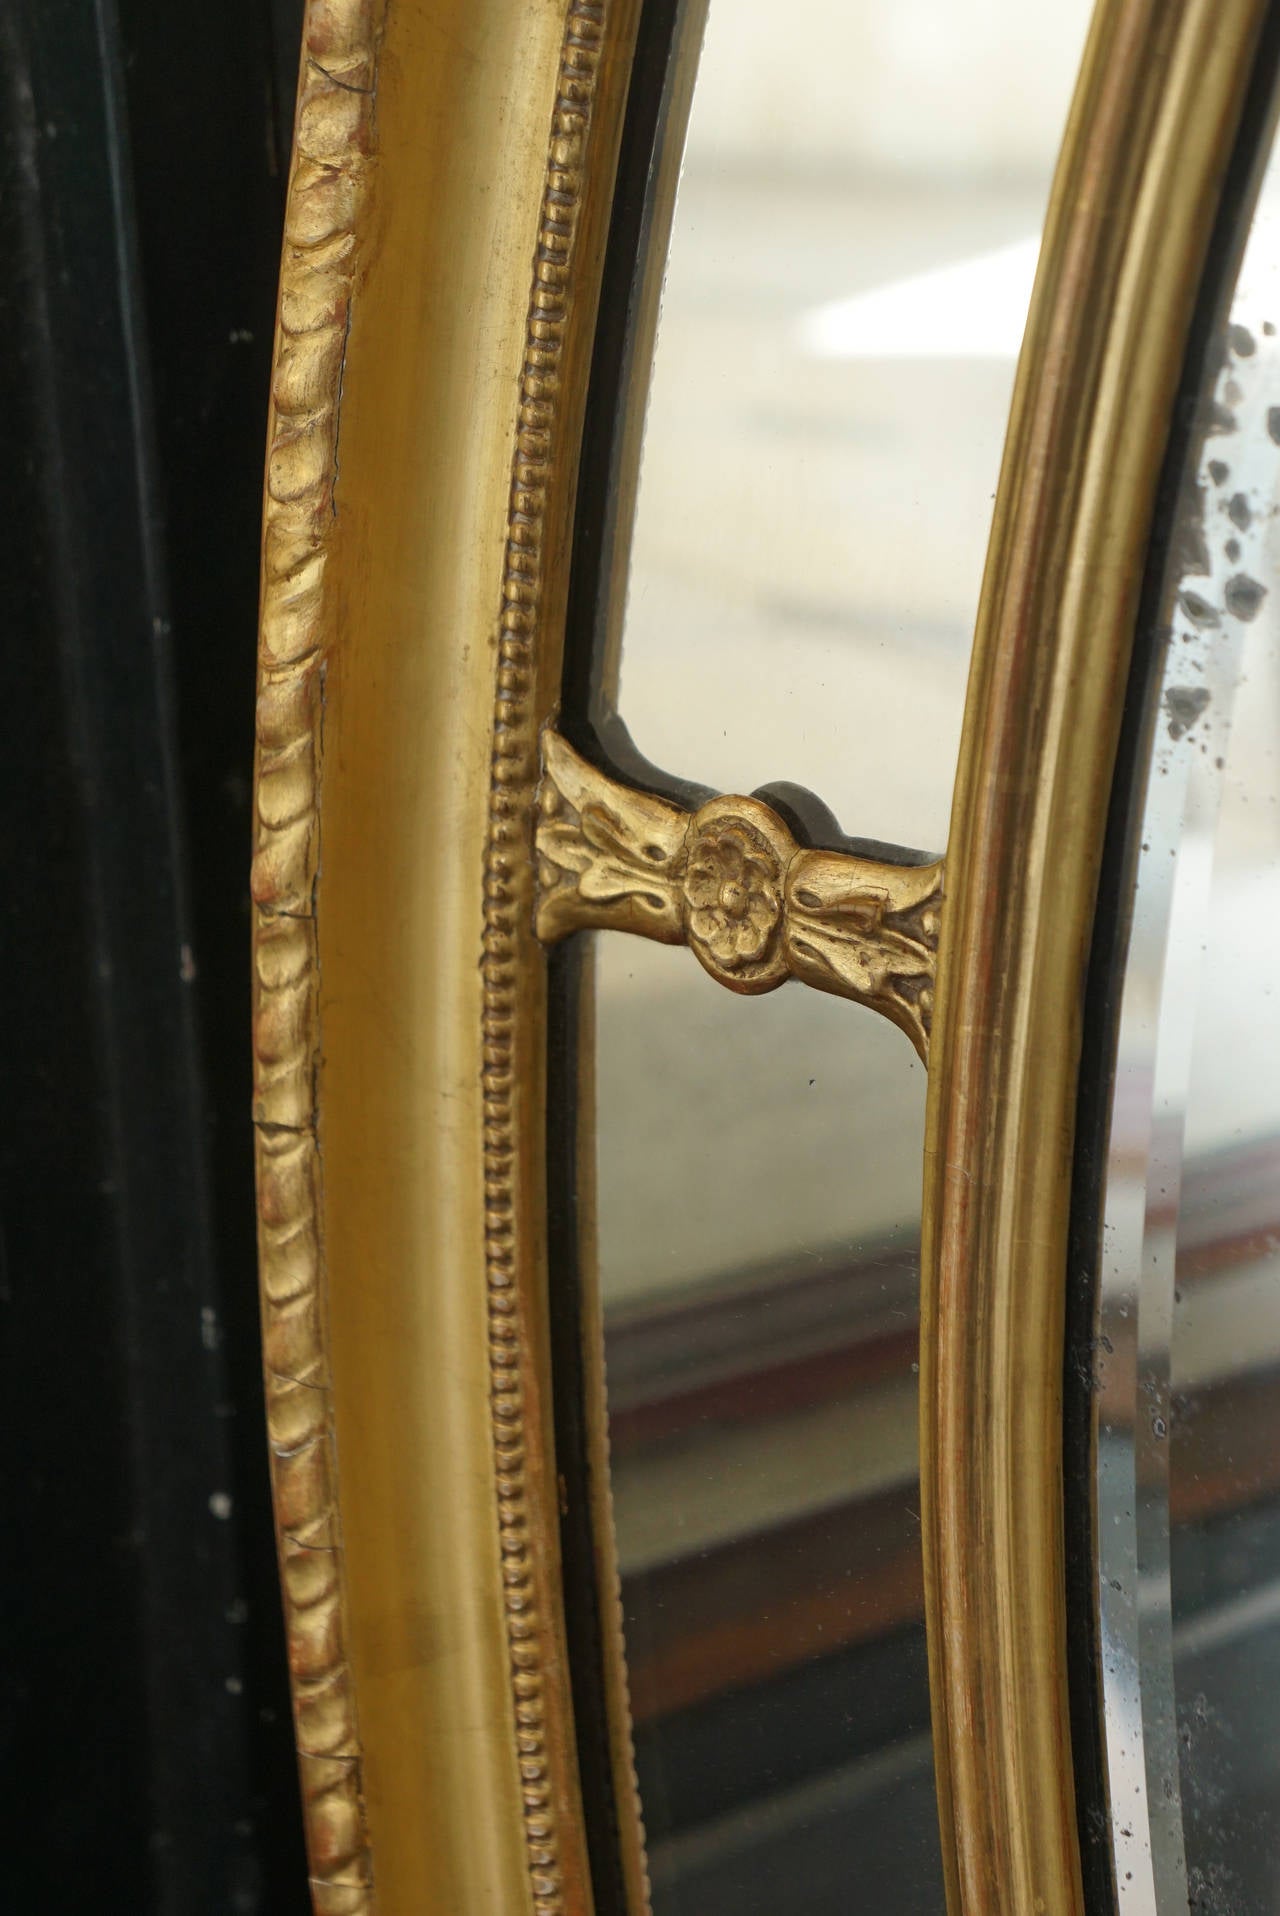 This fine vintage mirror is made of wood and gesso which has been matte and burnished water gilded. The piece was most likely made in England. The form is a Fine example of the type and shows many fine details. Created as a central panel with a